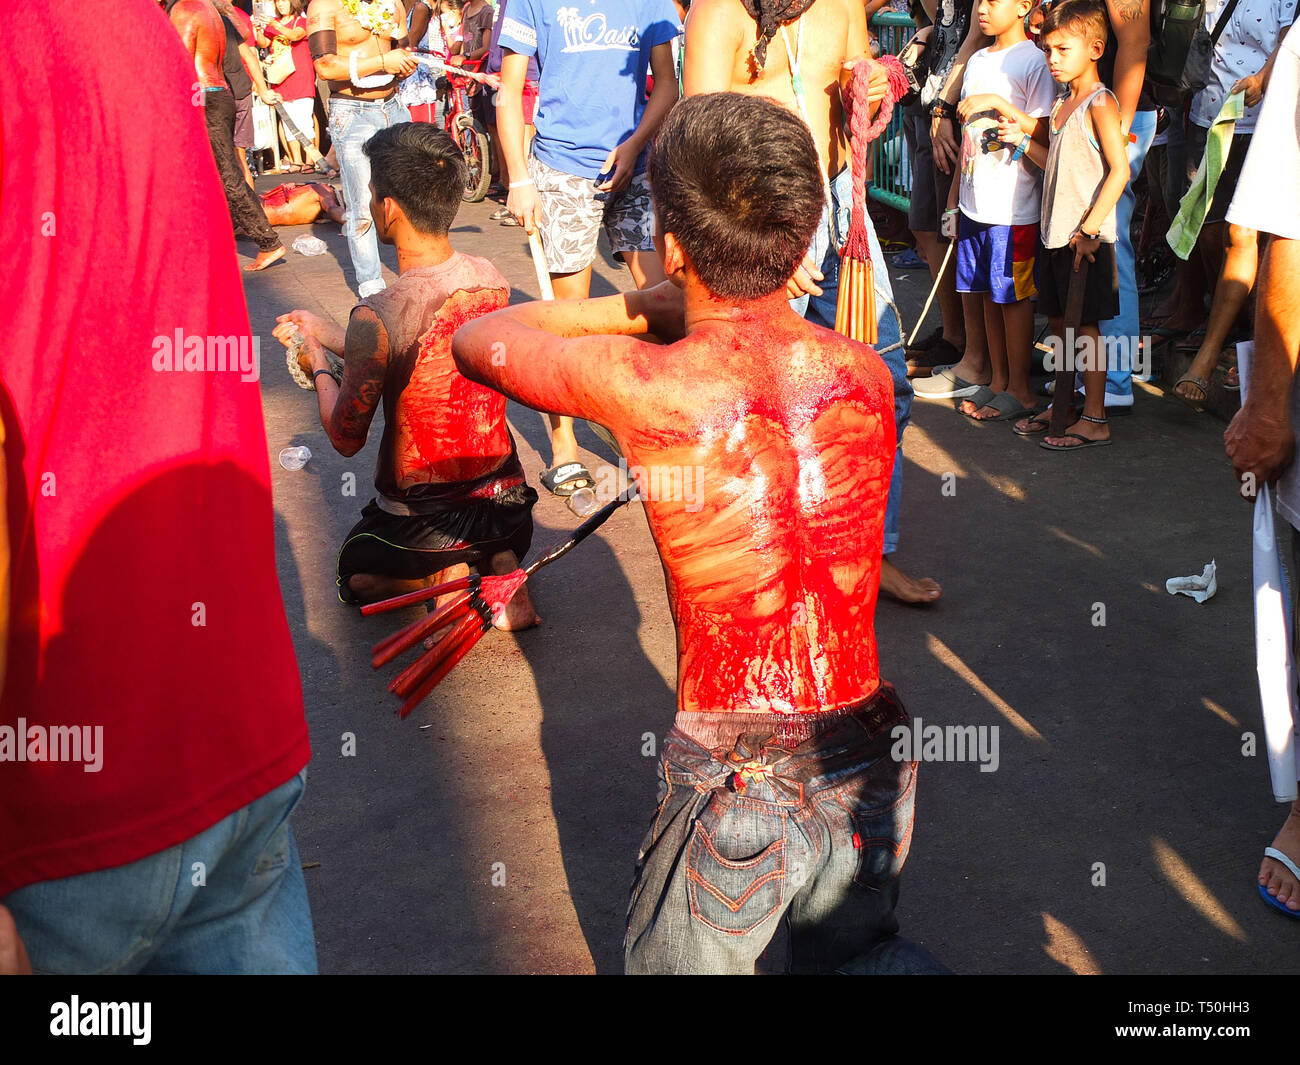 (EDITORS NOTE: Image contains graphic content) Back bloodied flagellates seen paraded on the streets of Navotas during Good Friday. Devout catholics in the deeply religious southeast asian nation of the philippines show their faith on good friday with self-flagellation or self-inflicting wounds,  imitating the suffering of christ. Stock Photo